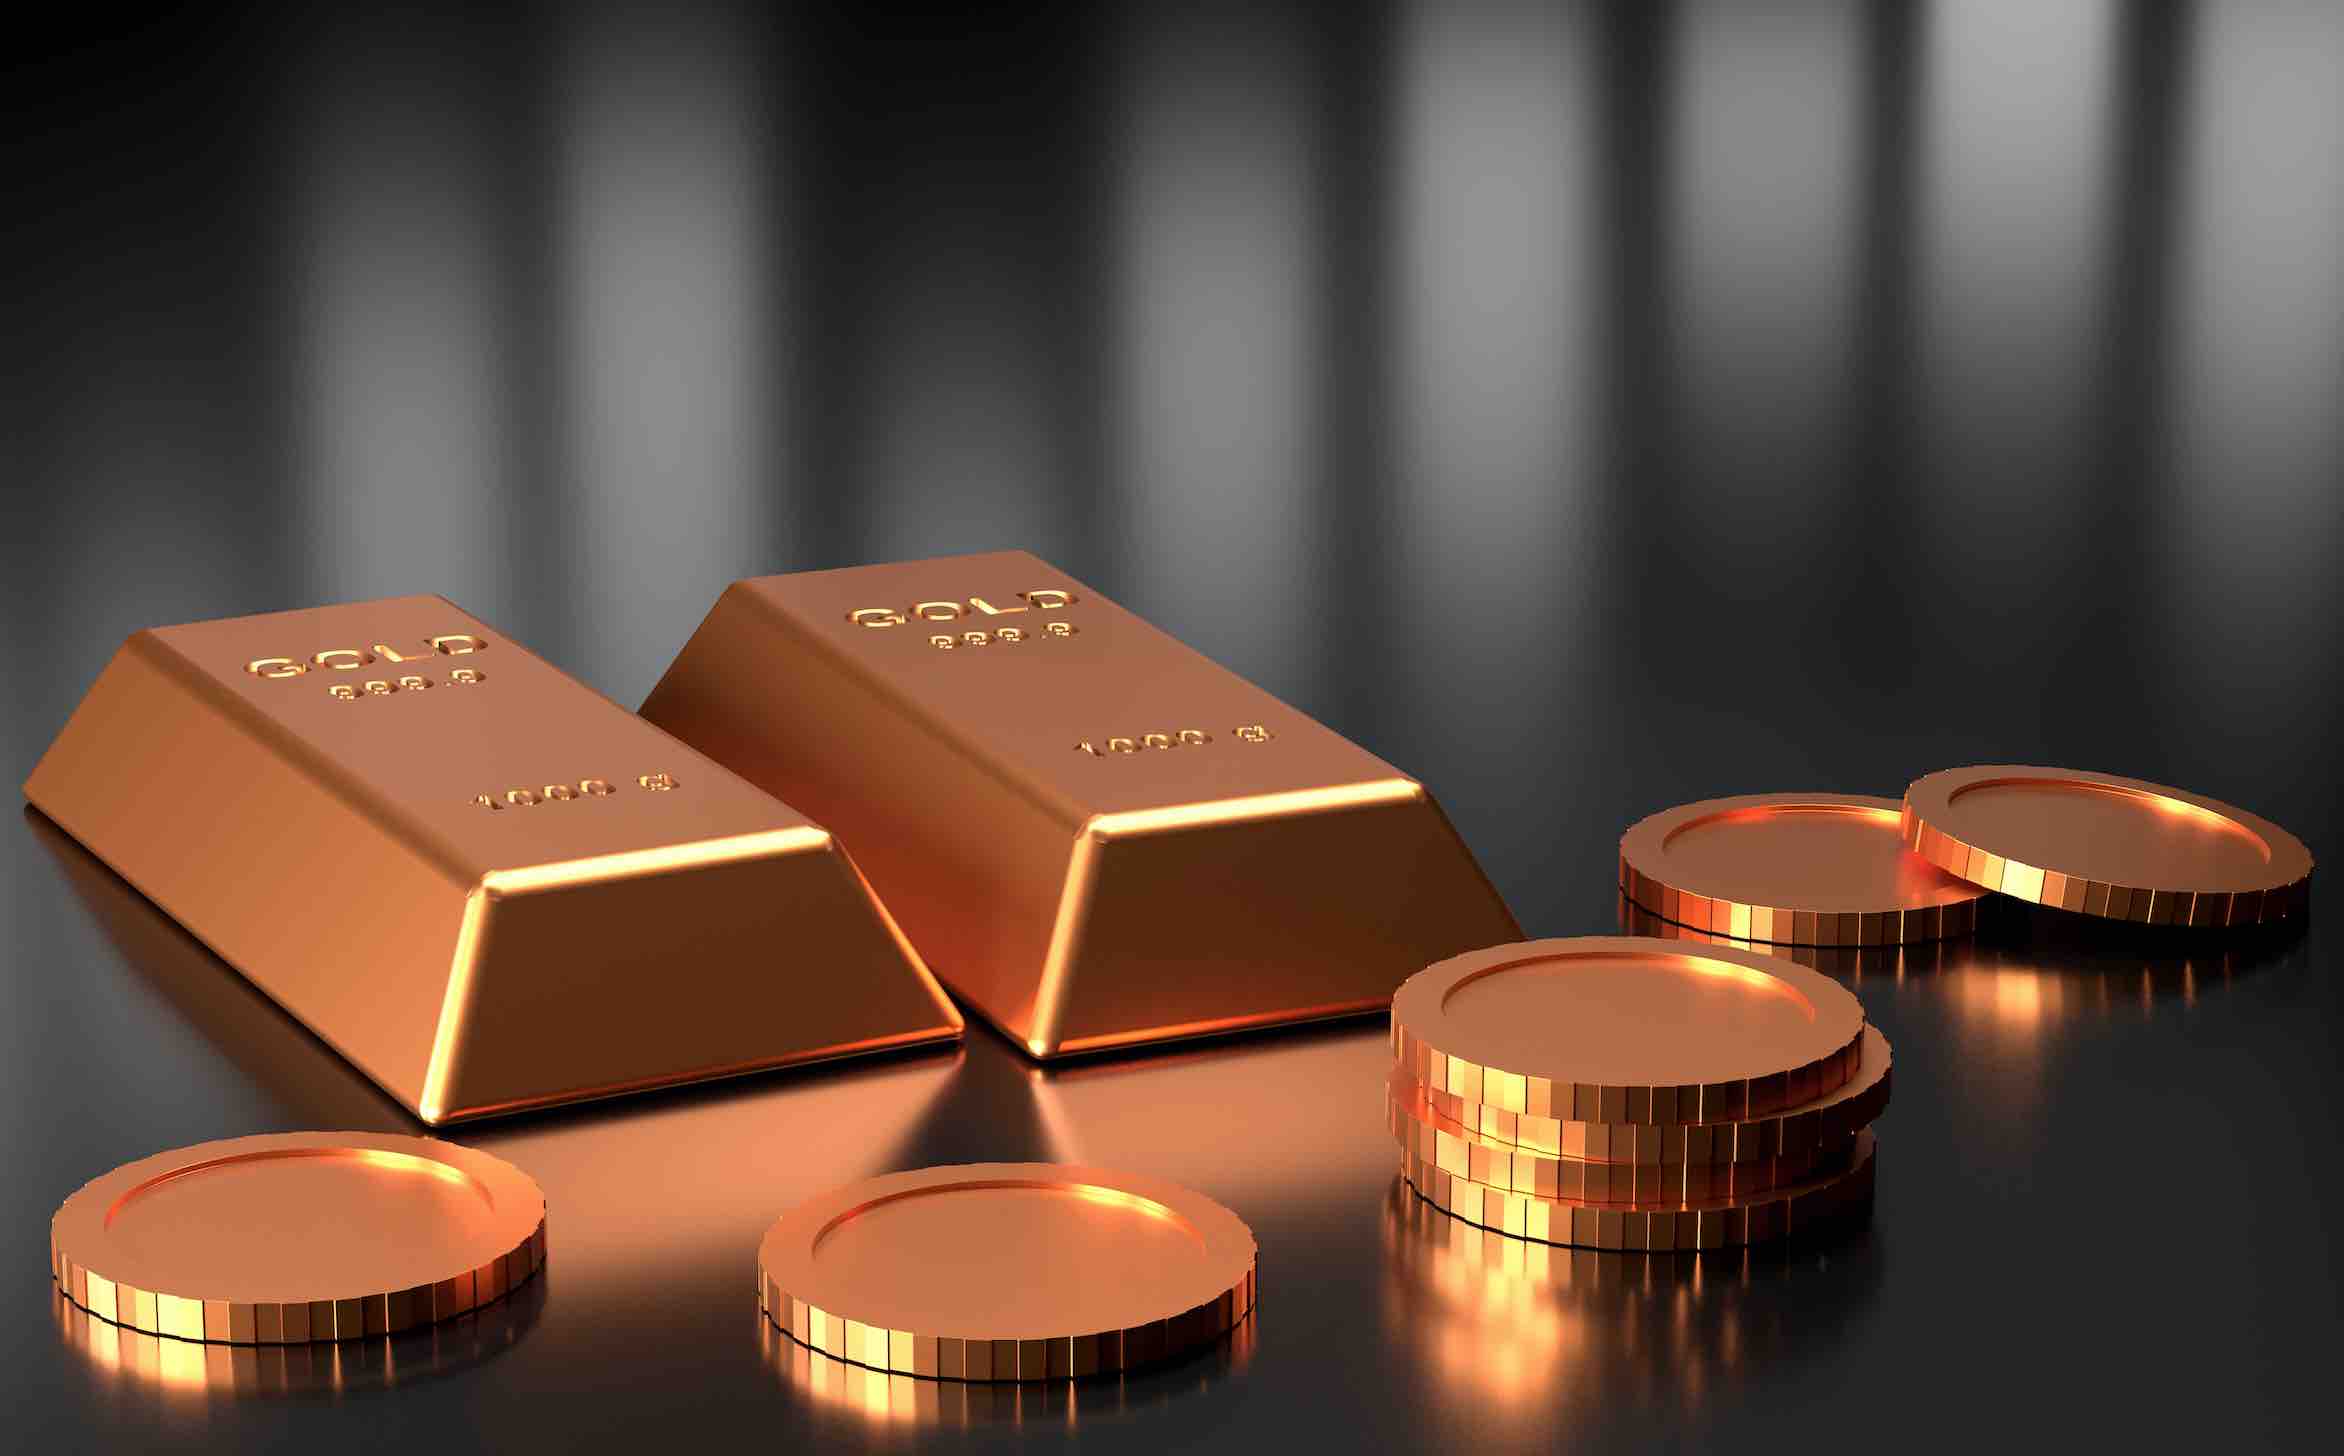 Gold Bars have always had a mysterious touch that awakened visions of secret rooms and thefts in people. However, what one sees as an operational conventional investor is much different from what exists out there. Generally, gold bars are a good start for